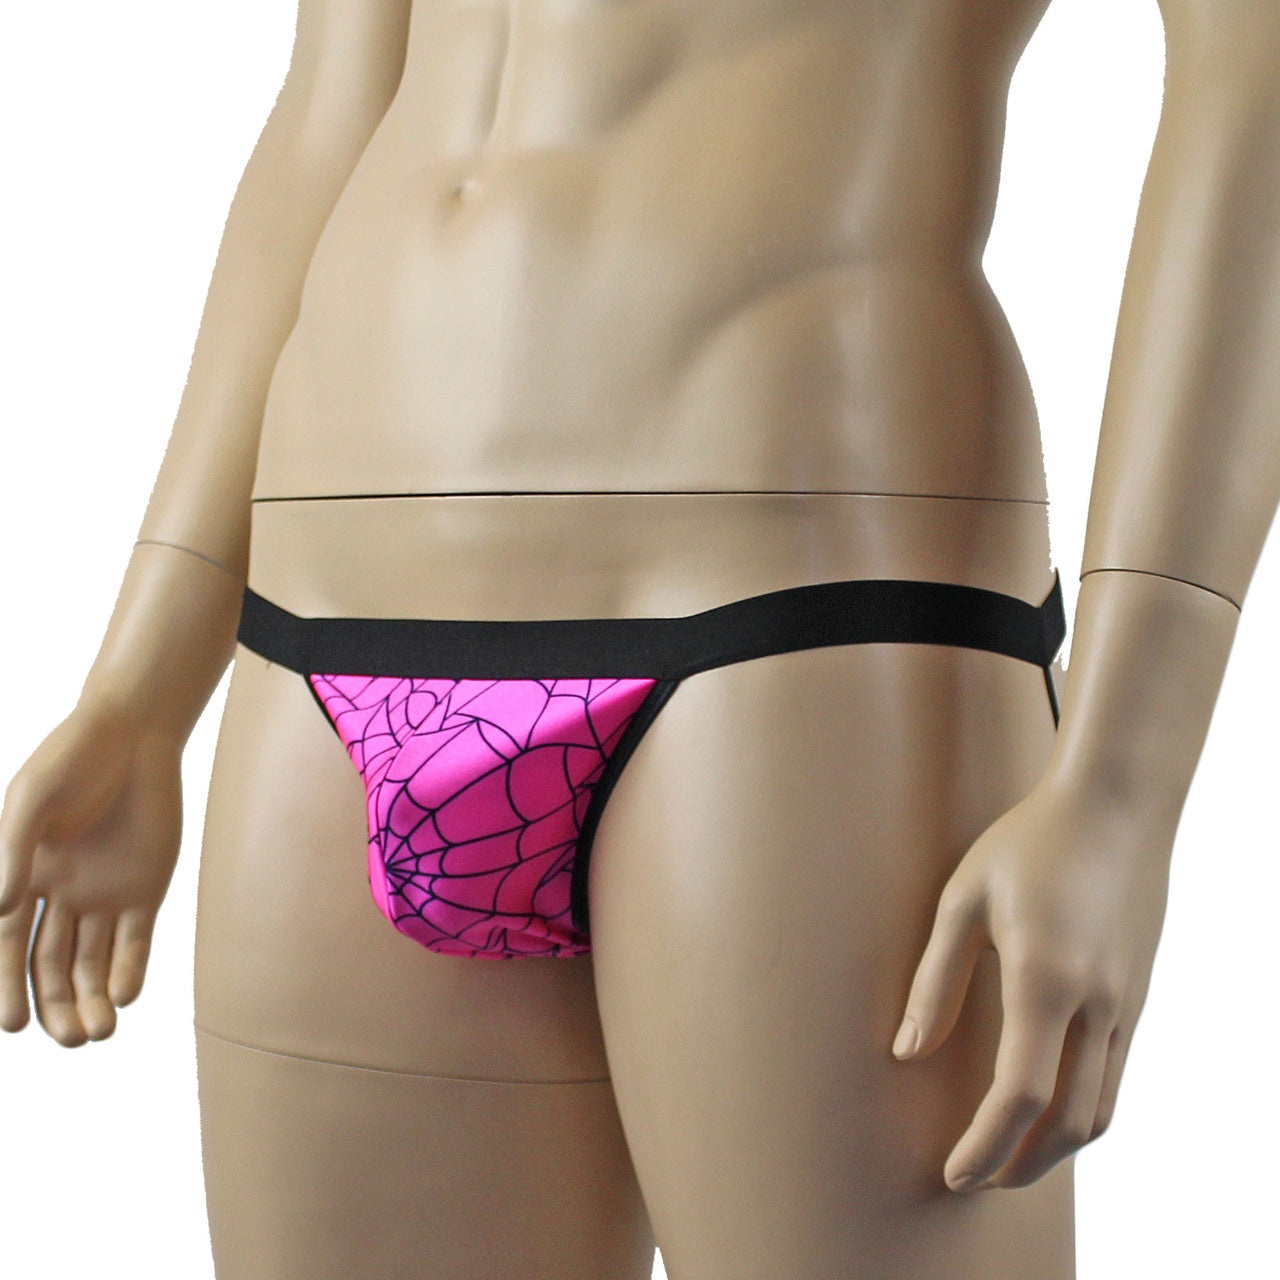 Mens Spider Web Mini Jock Strap with Band Lime Green or Hot Pink